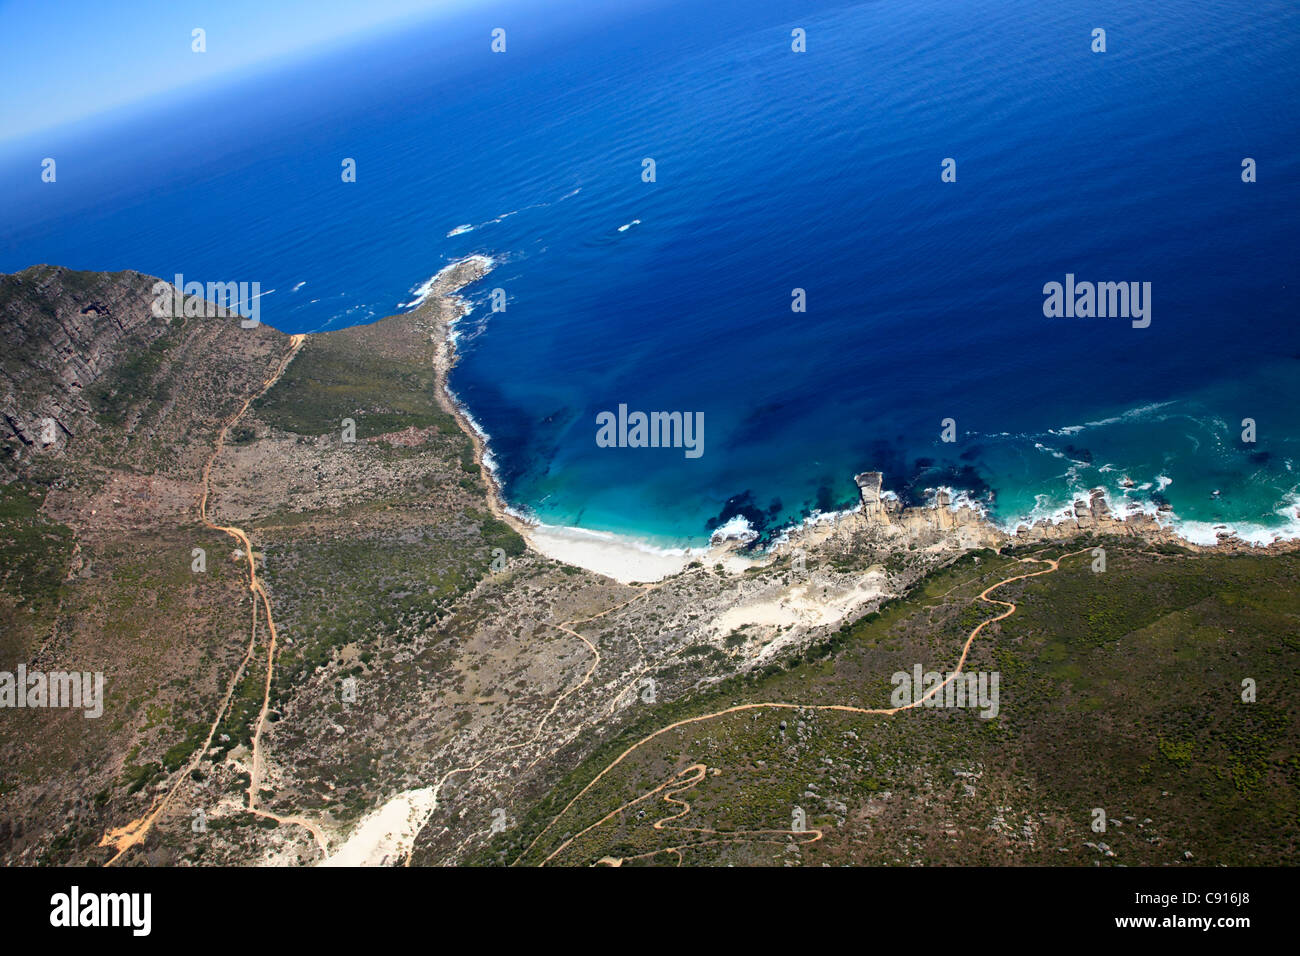 Table Mountain National Park previously known as the Cape Peninsula National Park incorporates the Cape Peninsula,which is the Stock Photo